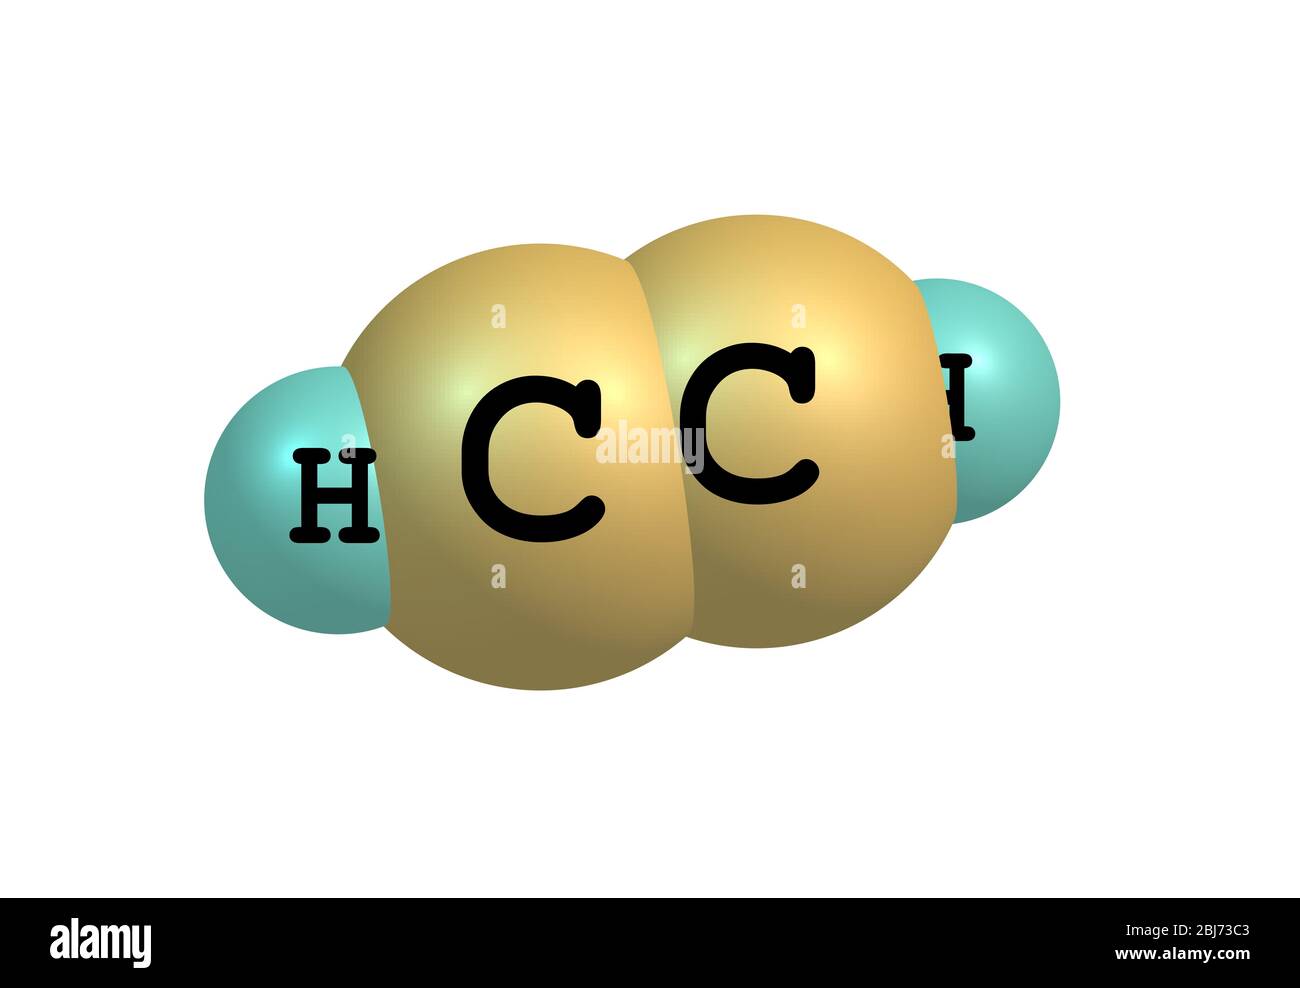 Acetylene (ethyne) is the chemical compound with the formula C2H2. It is a hydrocarbon and the simplest alkyne. This colorless gas is widely used as a Stock Photo